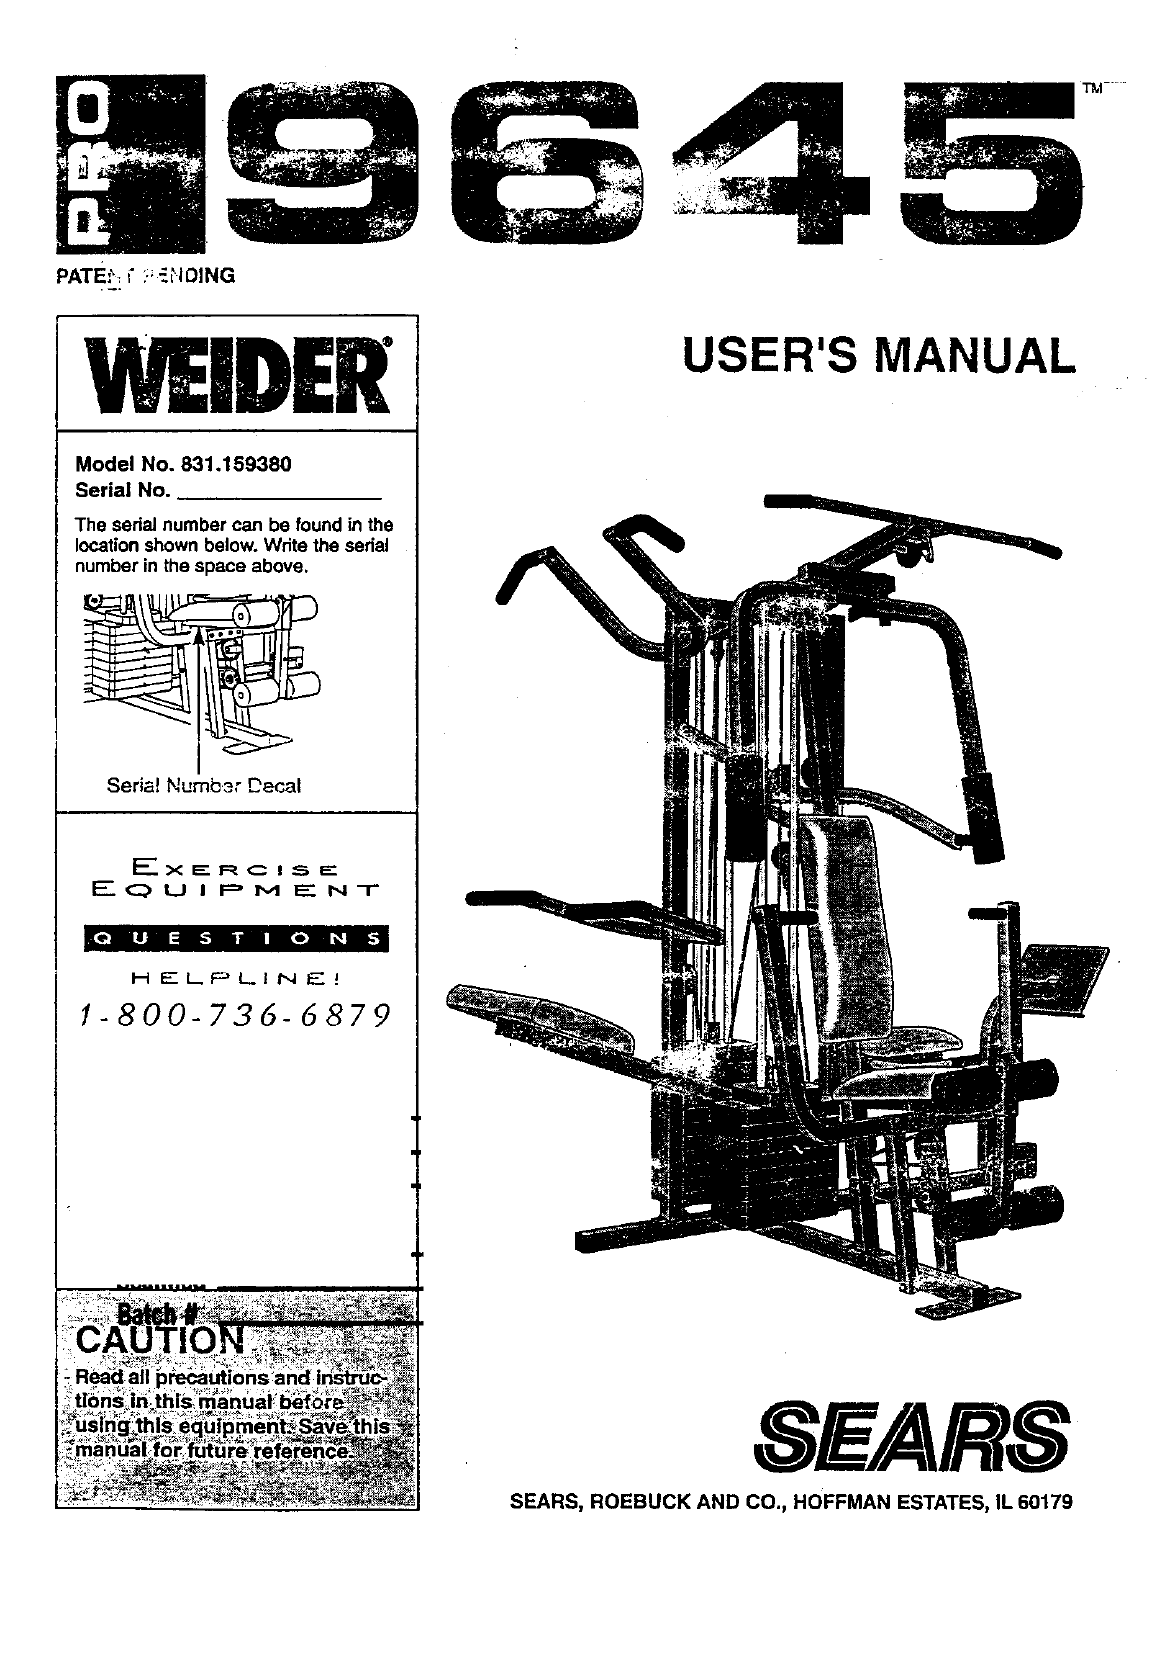 Sears User's Manual Home Gym - brownspots